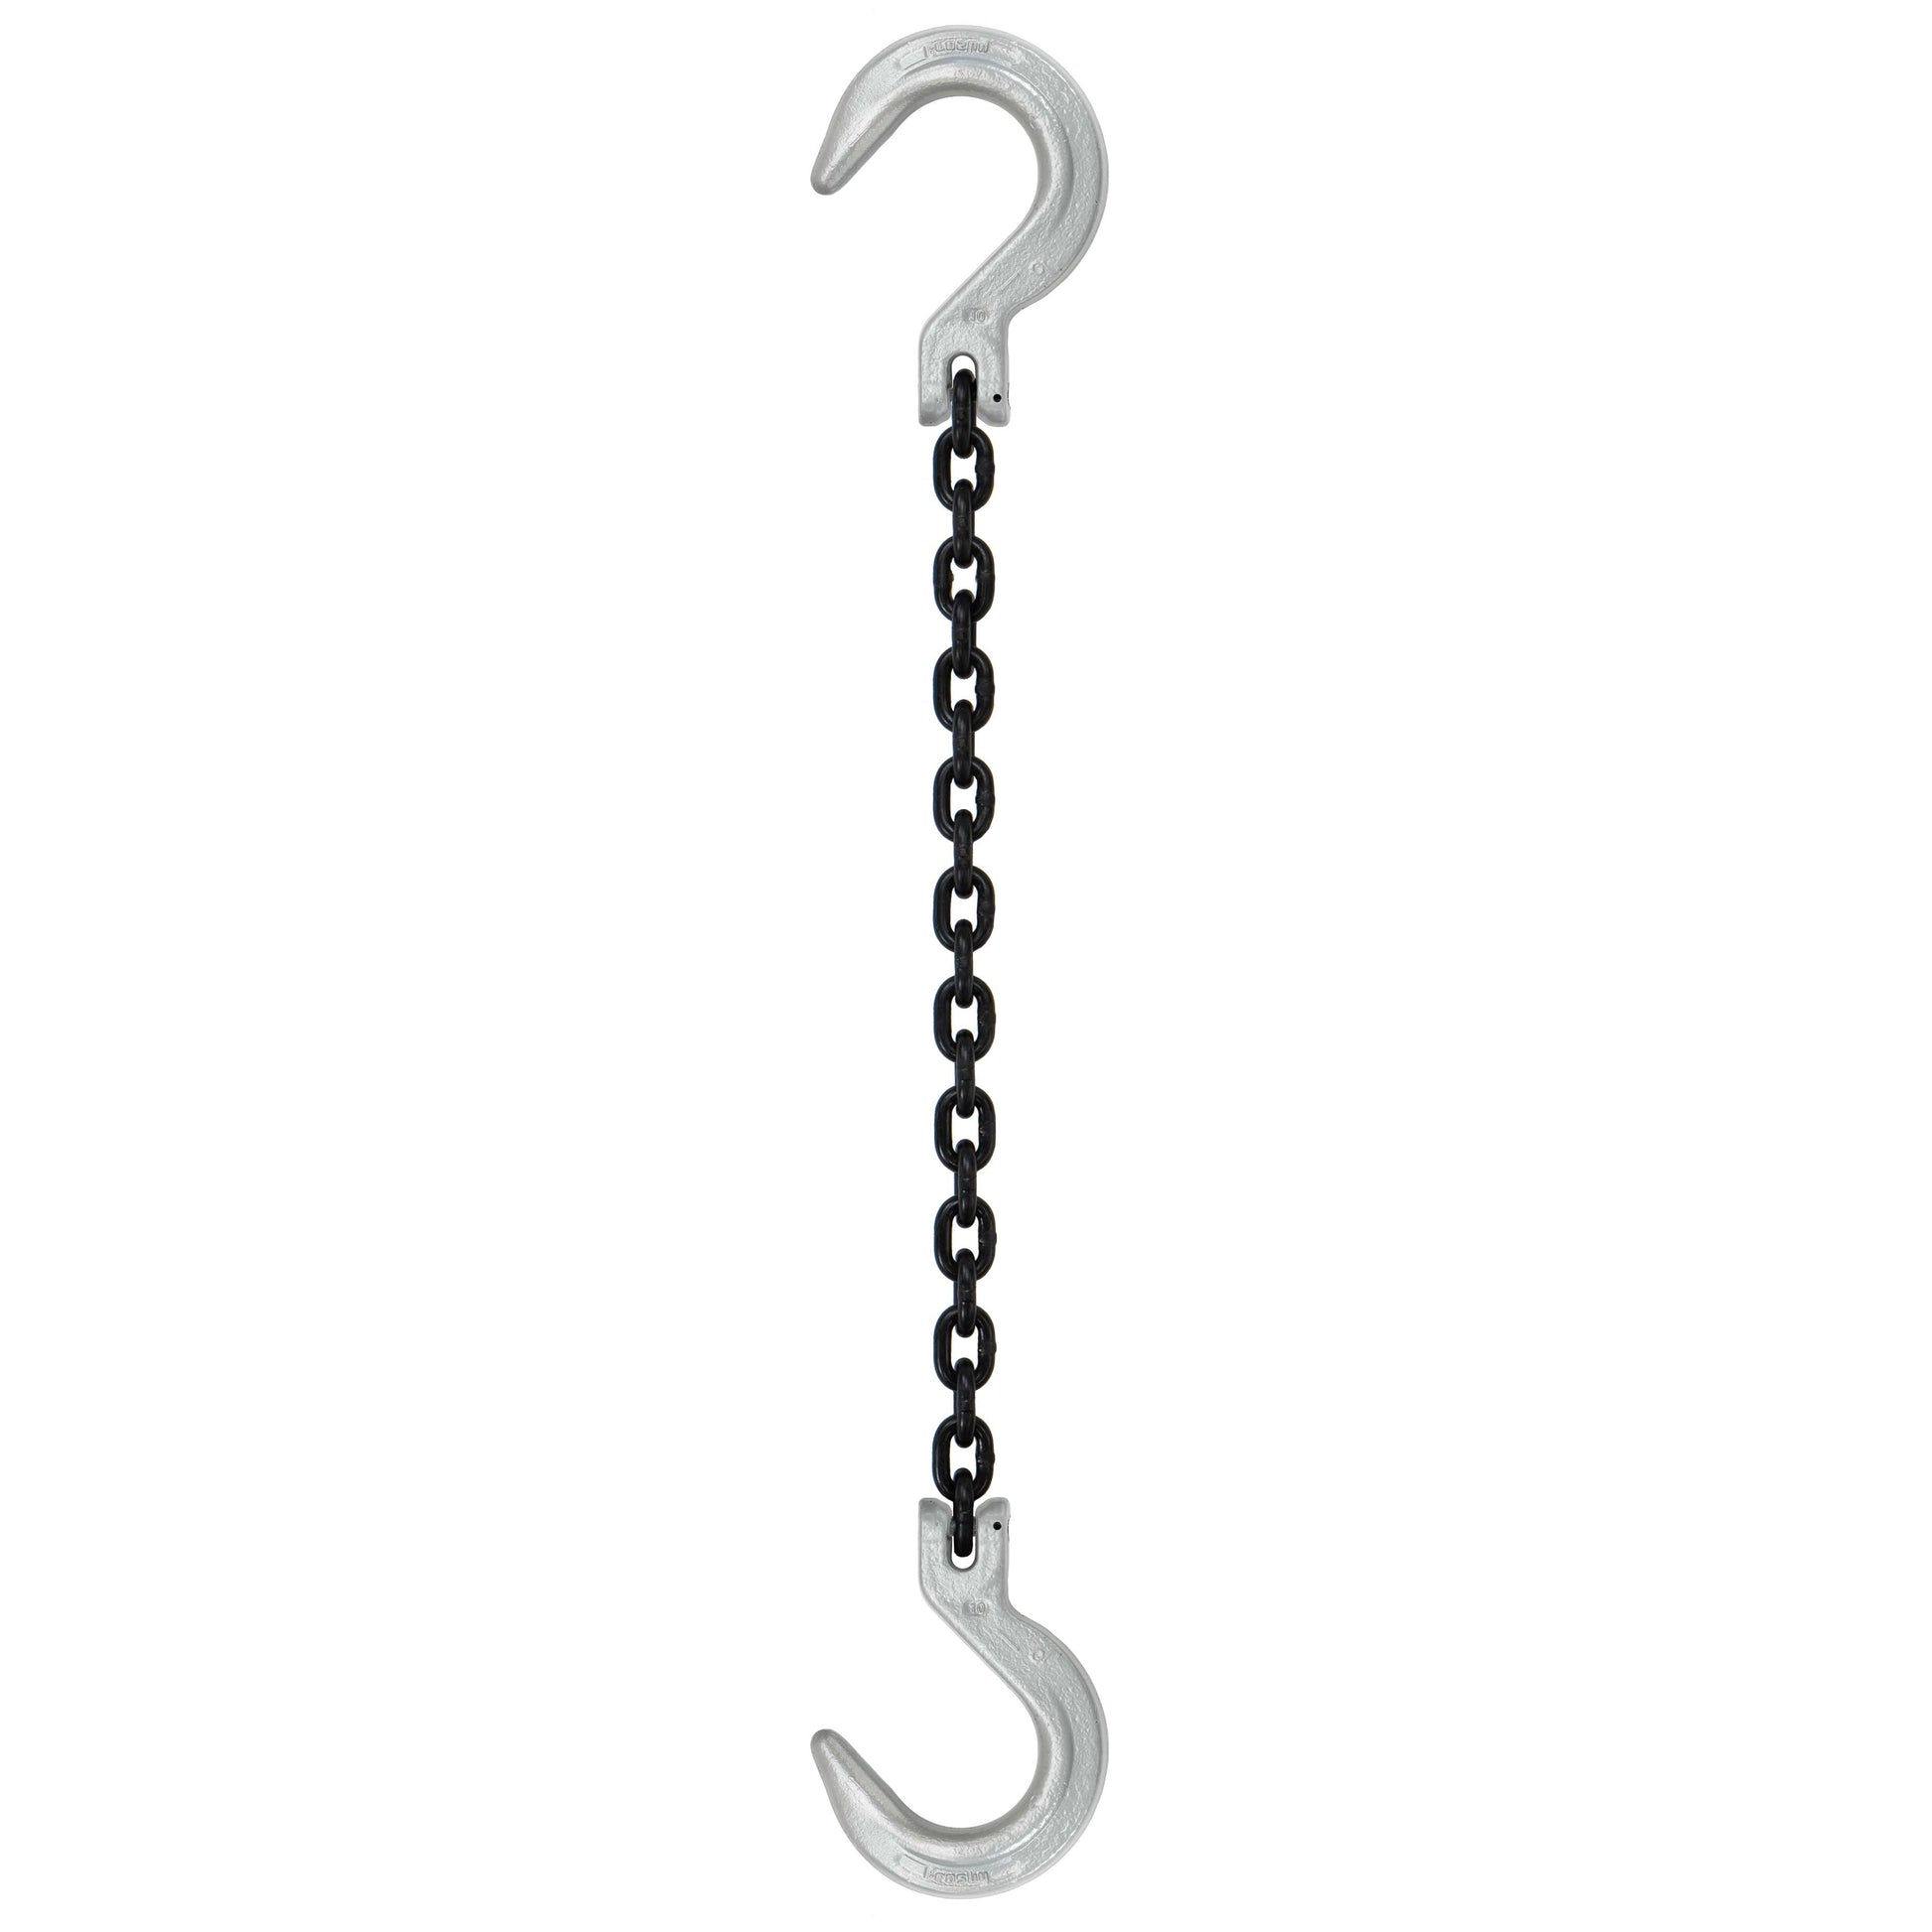 12 inch x 12 foot Domestic Single Leg Chain Sling w Crosby Foundry & Foundry Hooks Grade 100 image 1 of 2